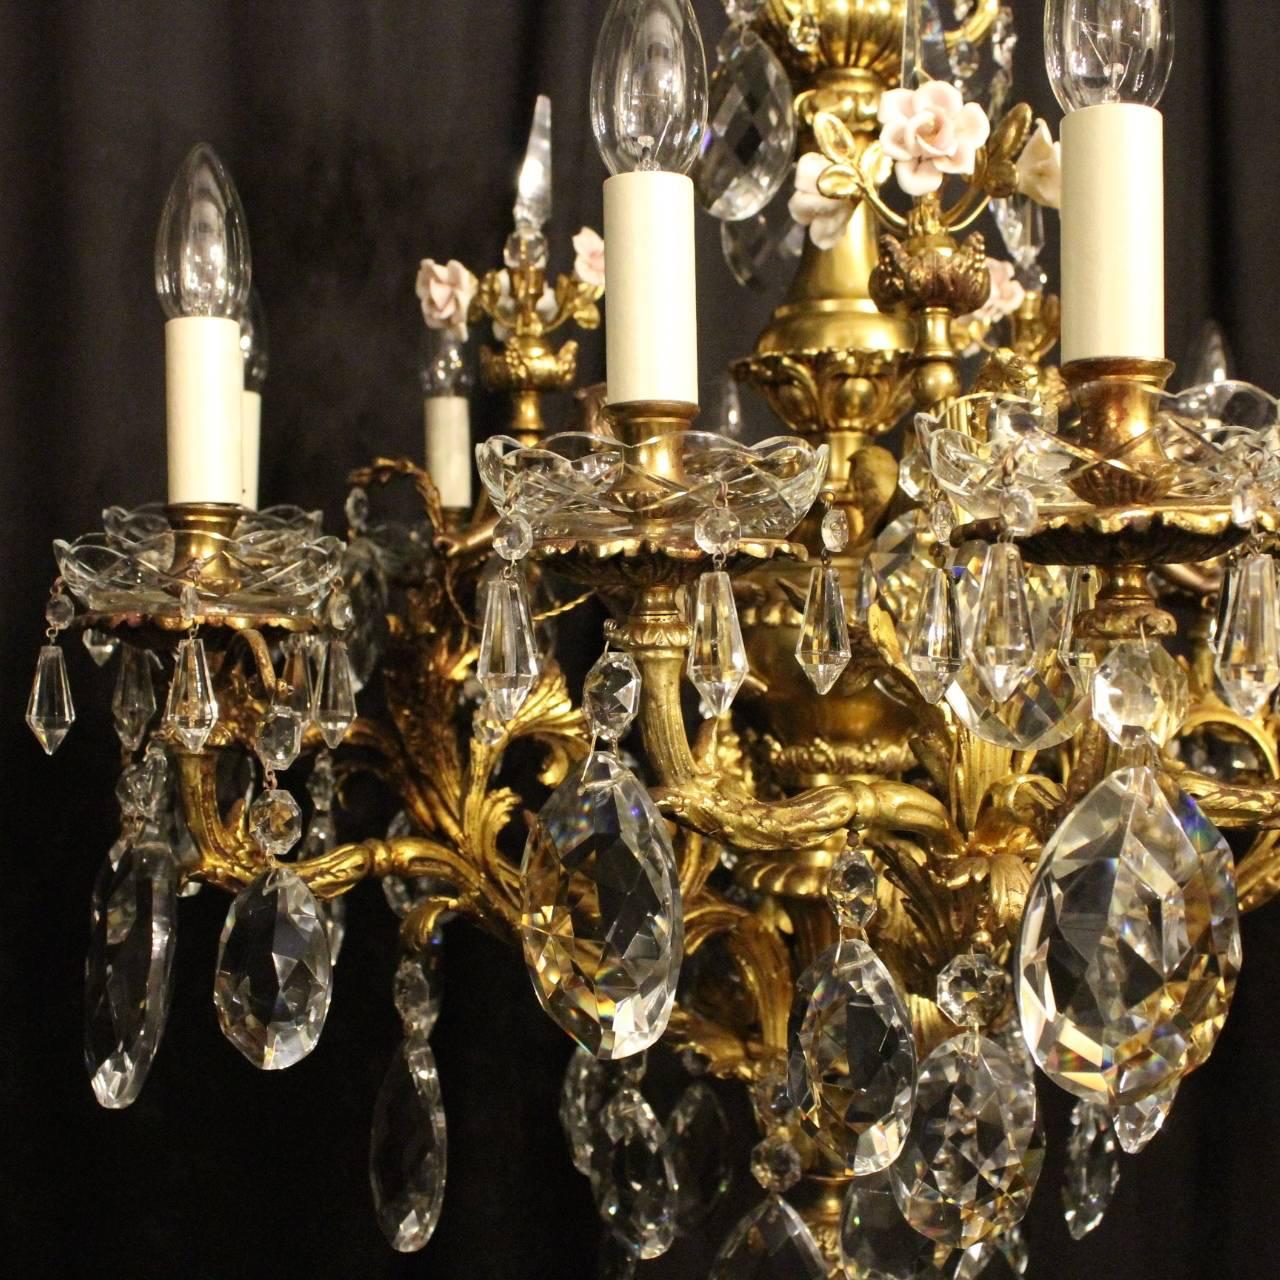 A French gilded cast bronze and crystal twelve-light cherub antique chandelier, the acanthus leaf scrolling arms with glass bobeche drip pans and bulbous candle sconces, issuing from an foliated interior with ornate bronze cherubs and porcelain